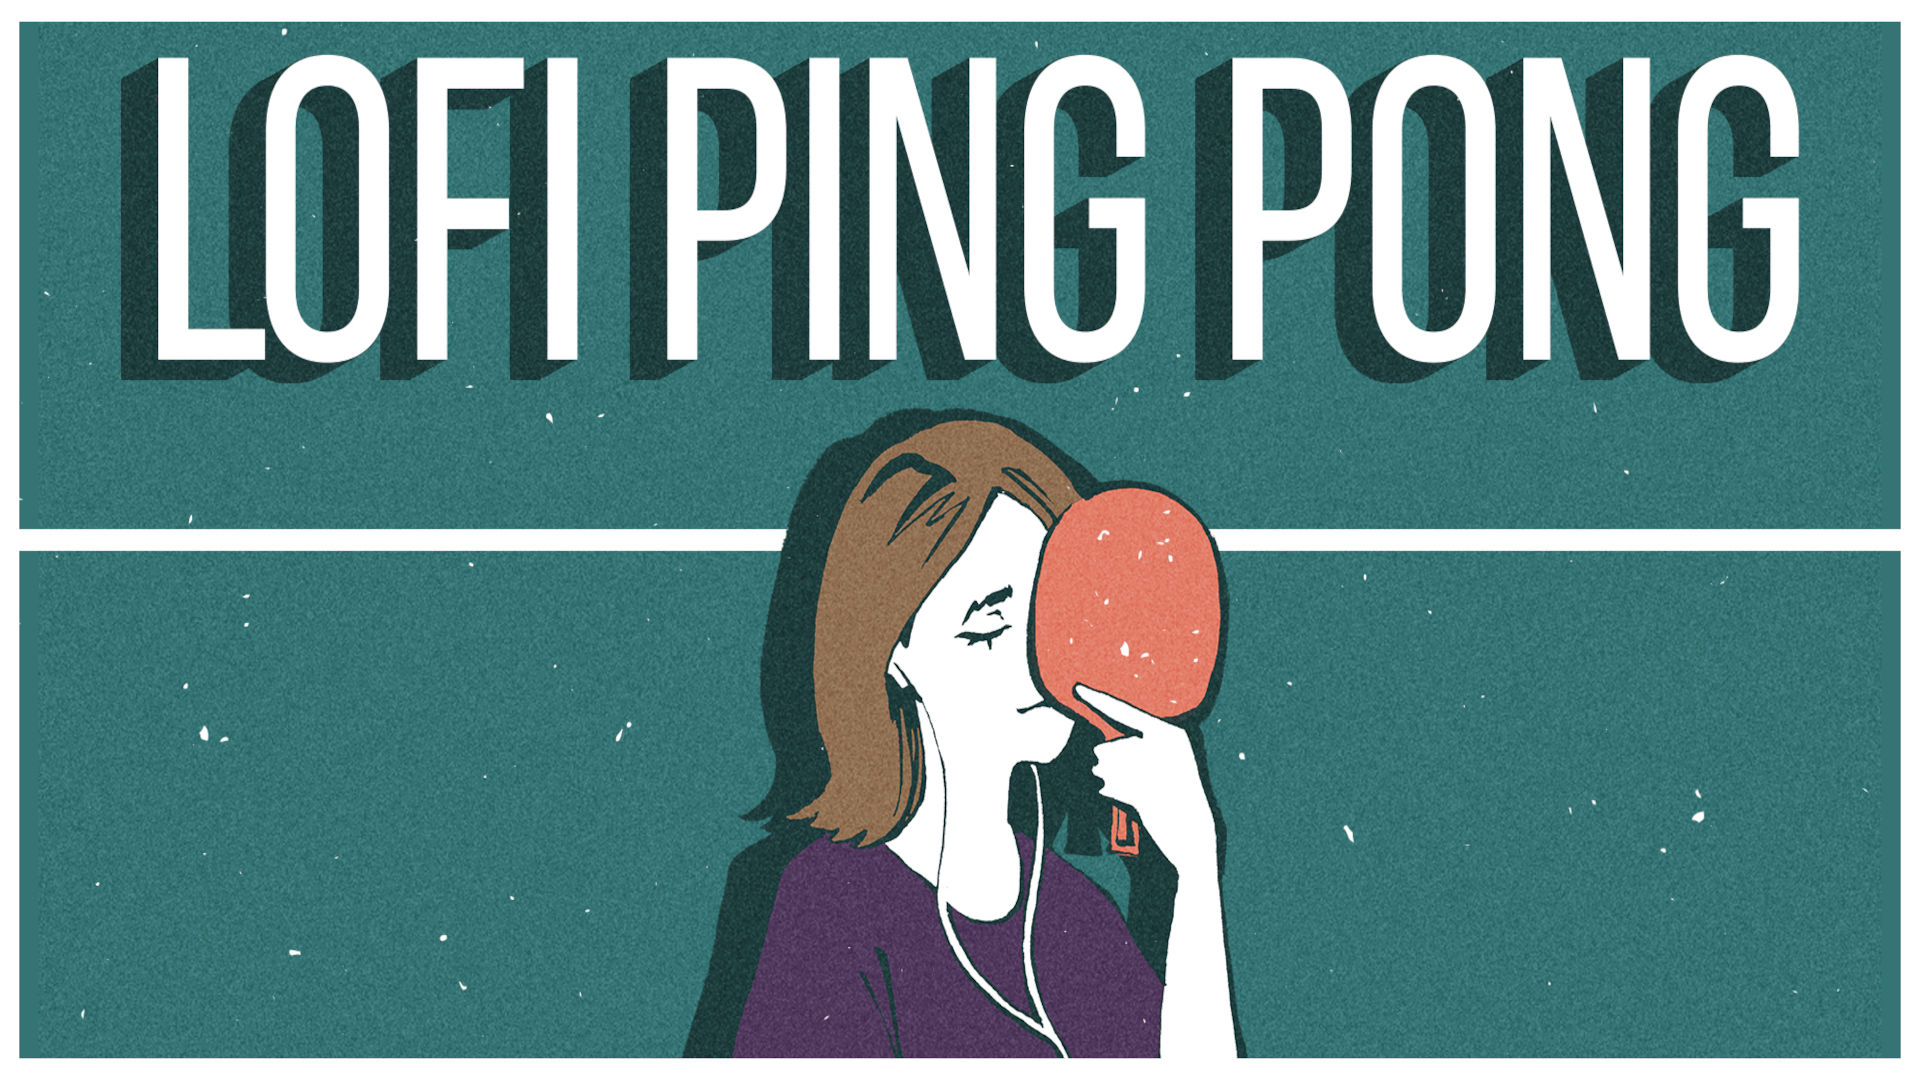 Cover art for Lofi Ping Pong, one of the indie ping pong games on Switch